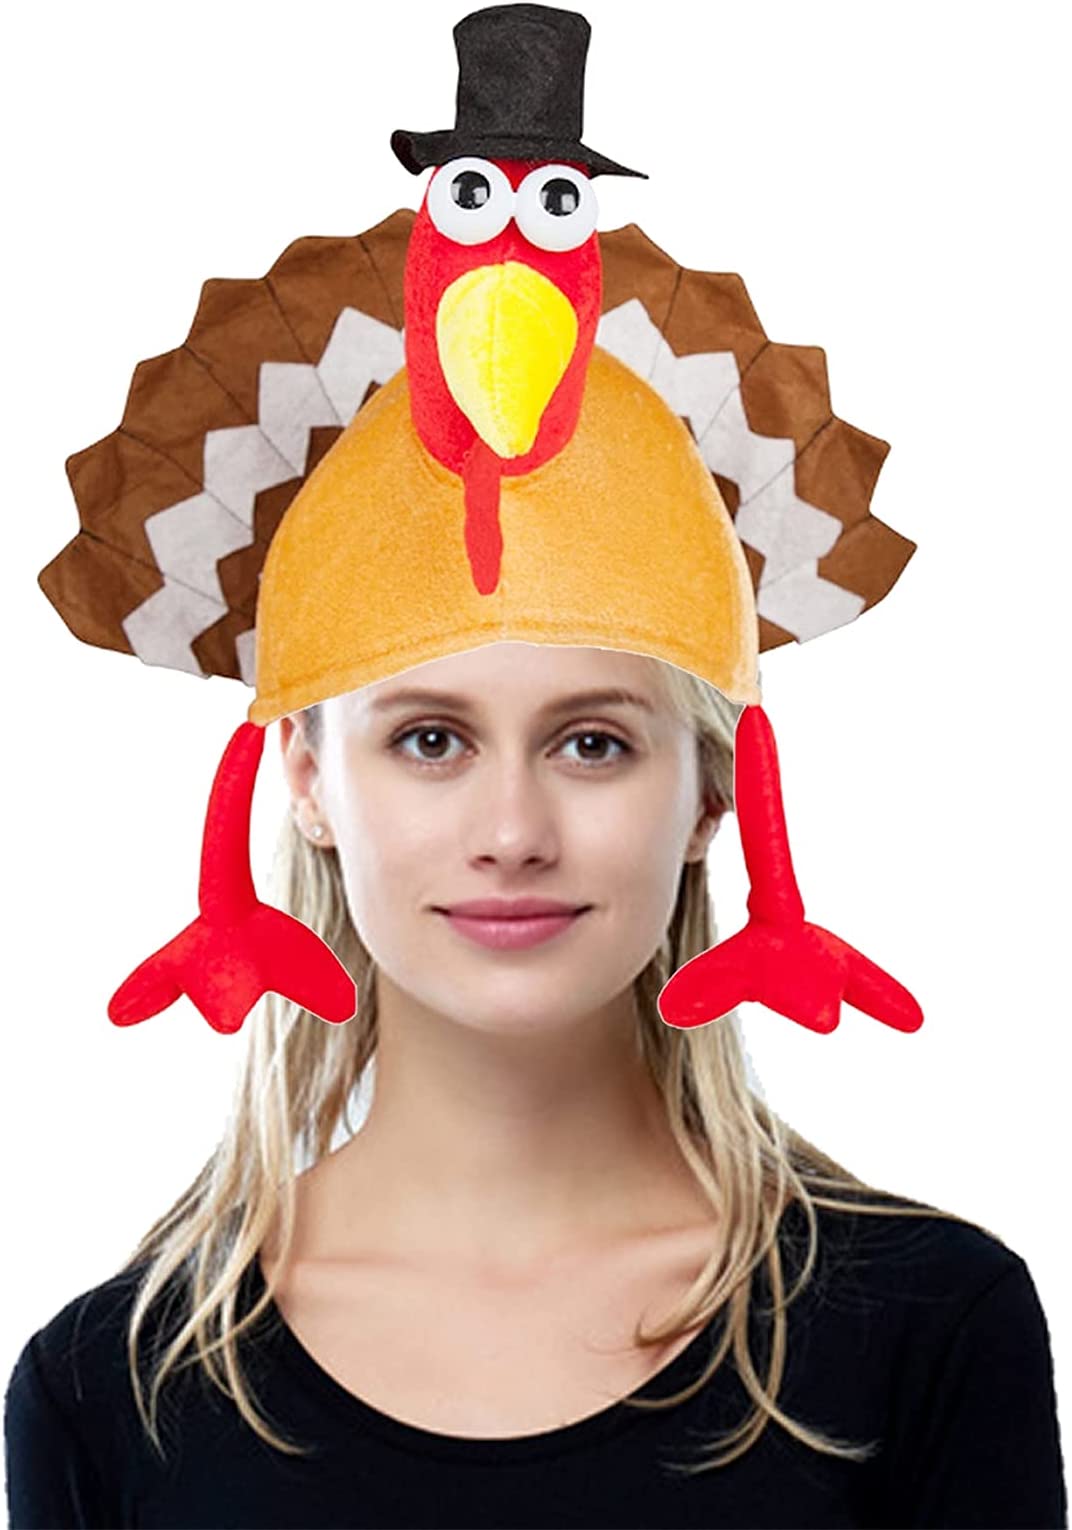 Thanksgiving Hat, 1 Pack Happiwiz Funny Roasted Cooked Turkey Hat Thanksgiving Day Hats Halloween Costume Dress Up - image 2 of 3